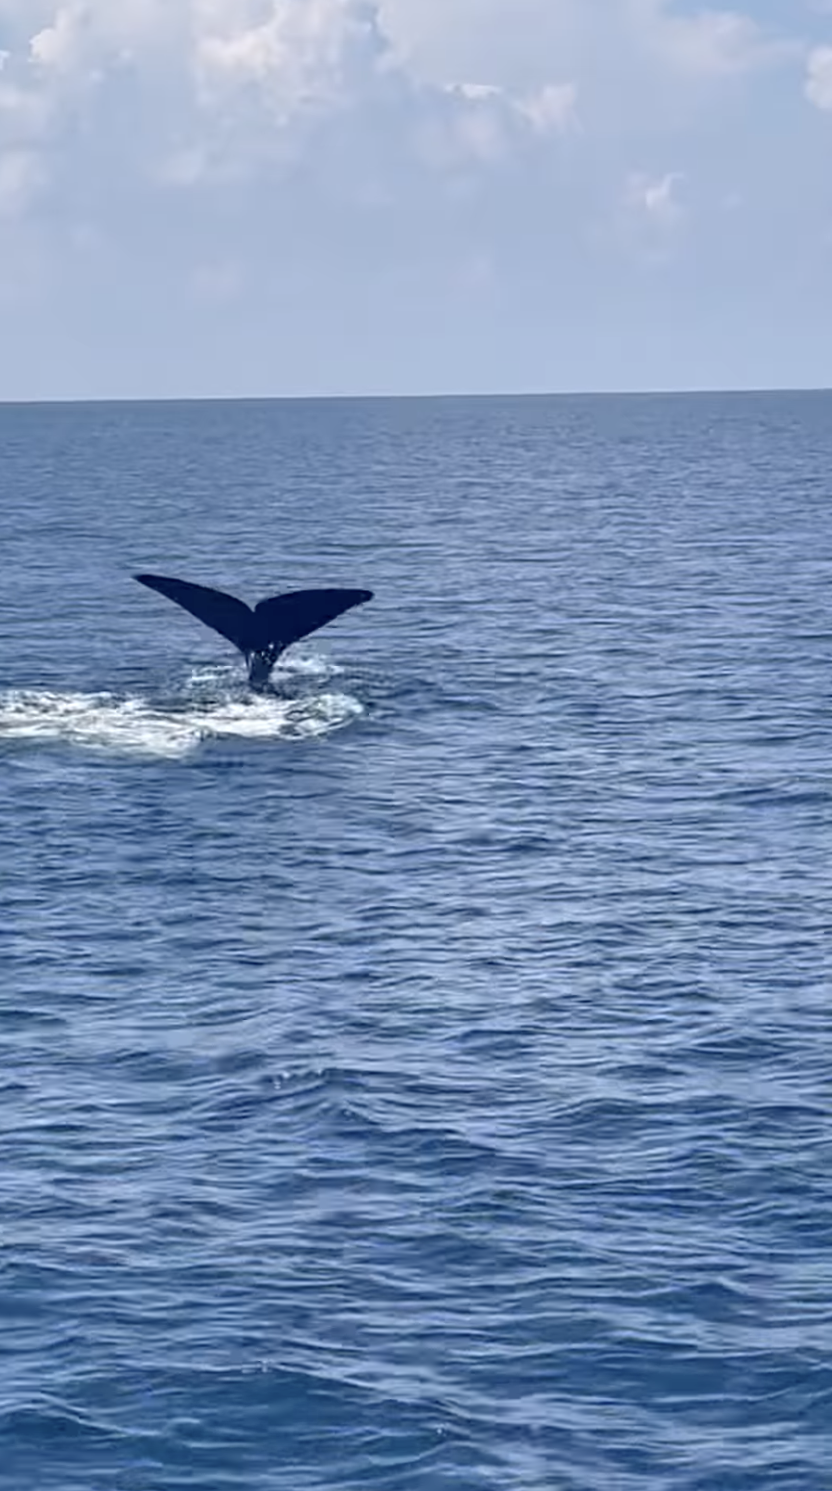 A screenshot taken from a video shared Sunday to the U.S. Coast Guard Venice station's Facebook page, which appeared to show three whales swimming in the Gulf of Mexico. The video was later removed from Facebook. / Credit: U.S. Coast Guard Venice Station / Facebook